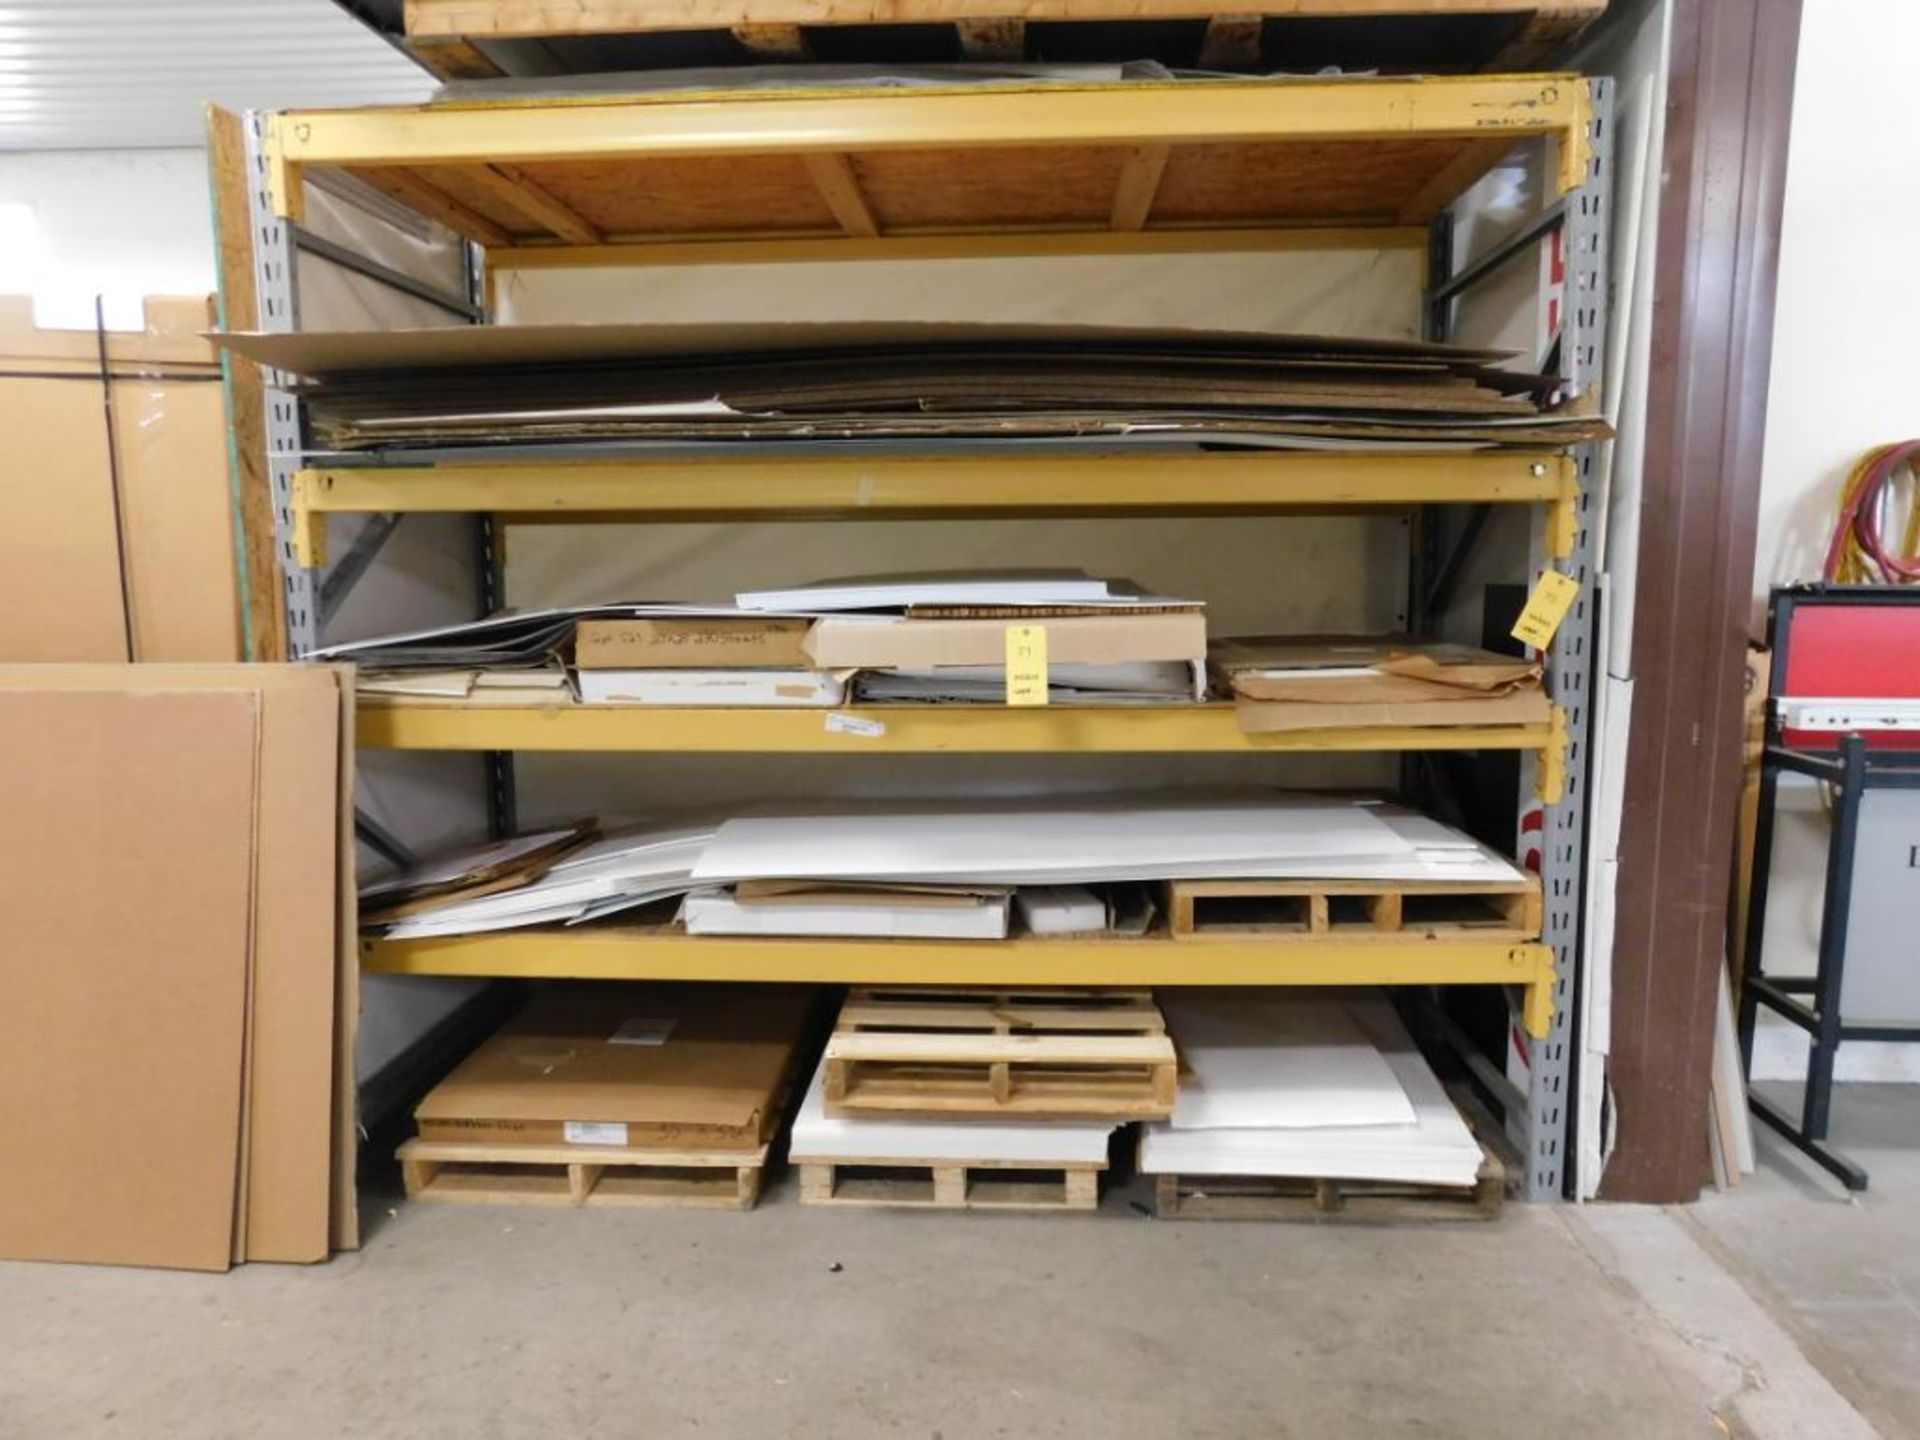 Section 9.5 ft. x 8 ft. x 42 in. (est.) Pallet Rack (no contents) (LOCATED IN ST. AUGUSTA, MN.) - Image 2 of 2